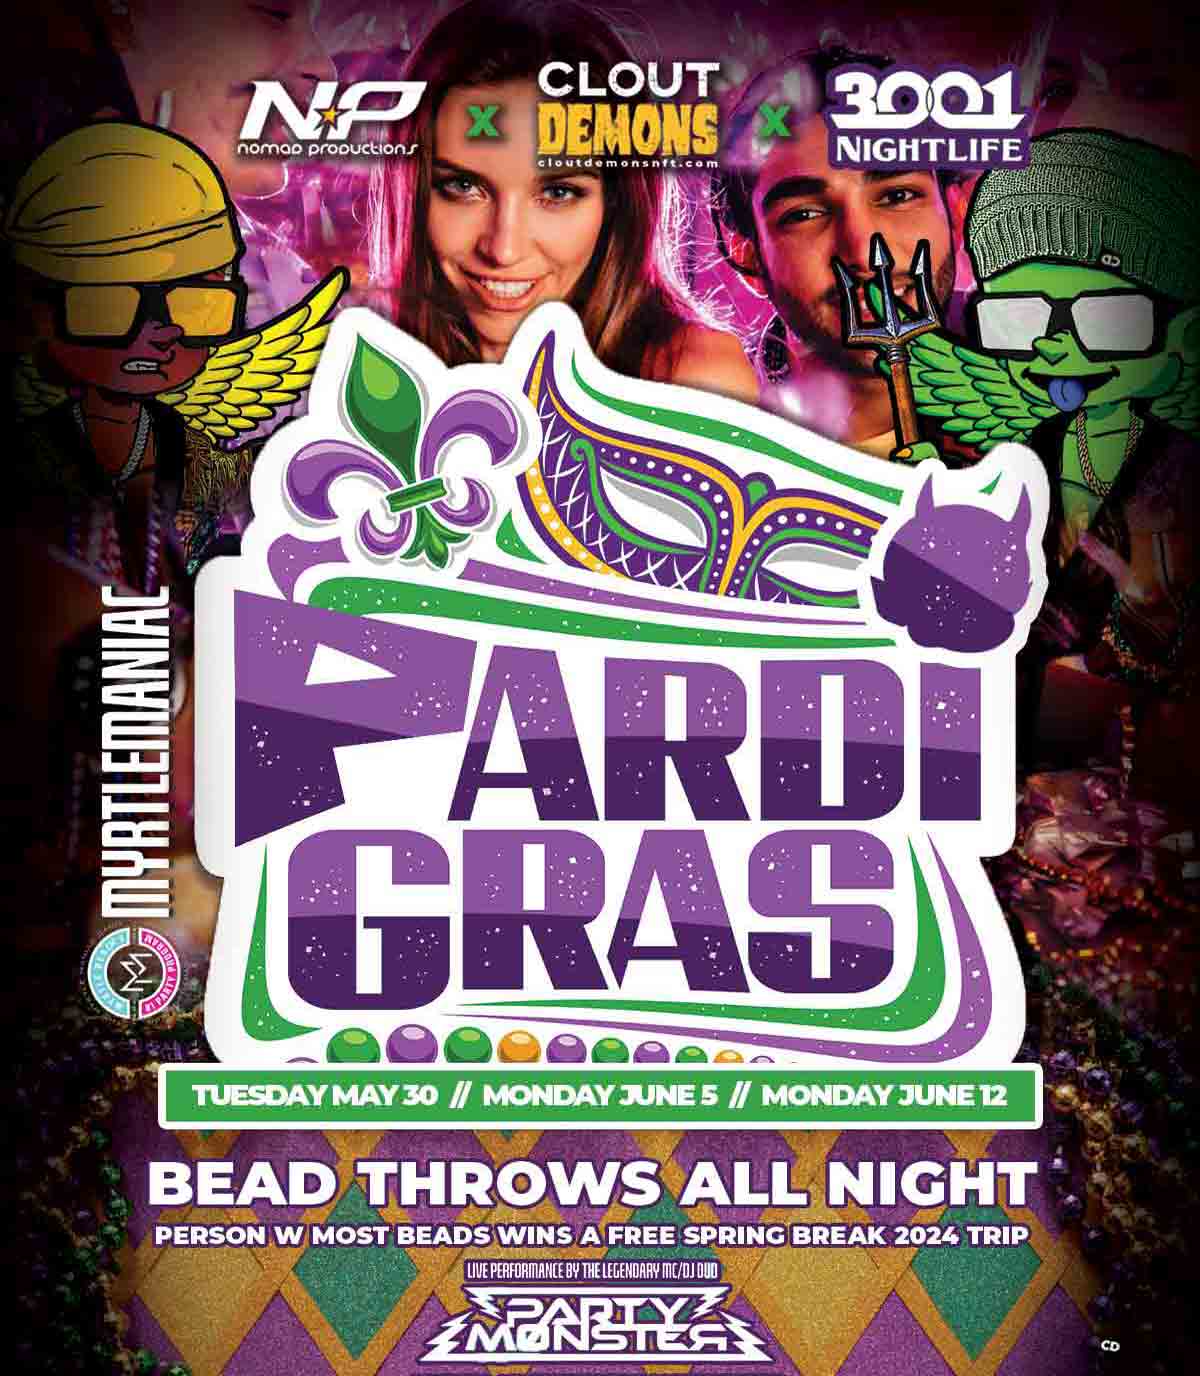 Clout Demons Clothing and Myrtle Maniac have teamed up with the House of Blues for the most epic Pardi Gras Party in the USA